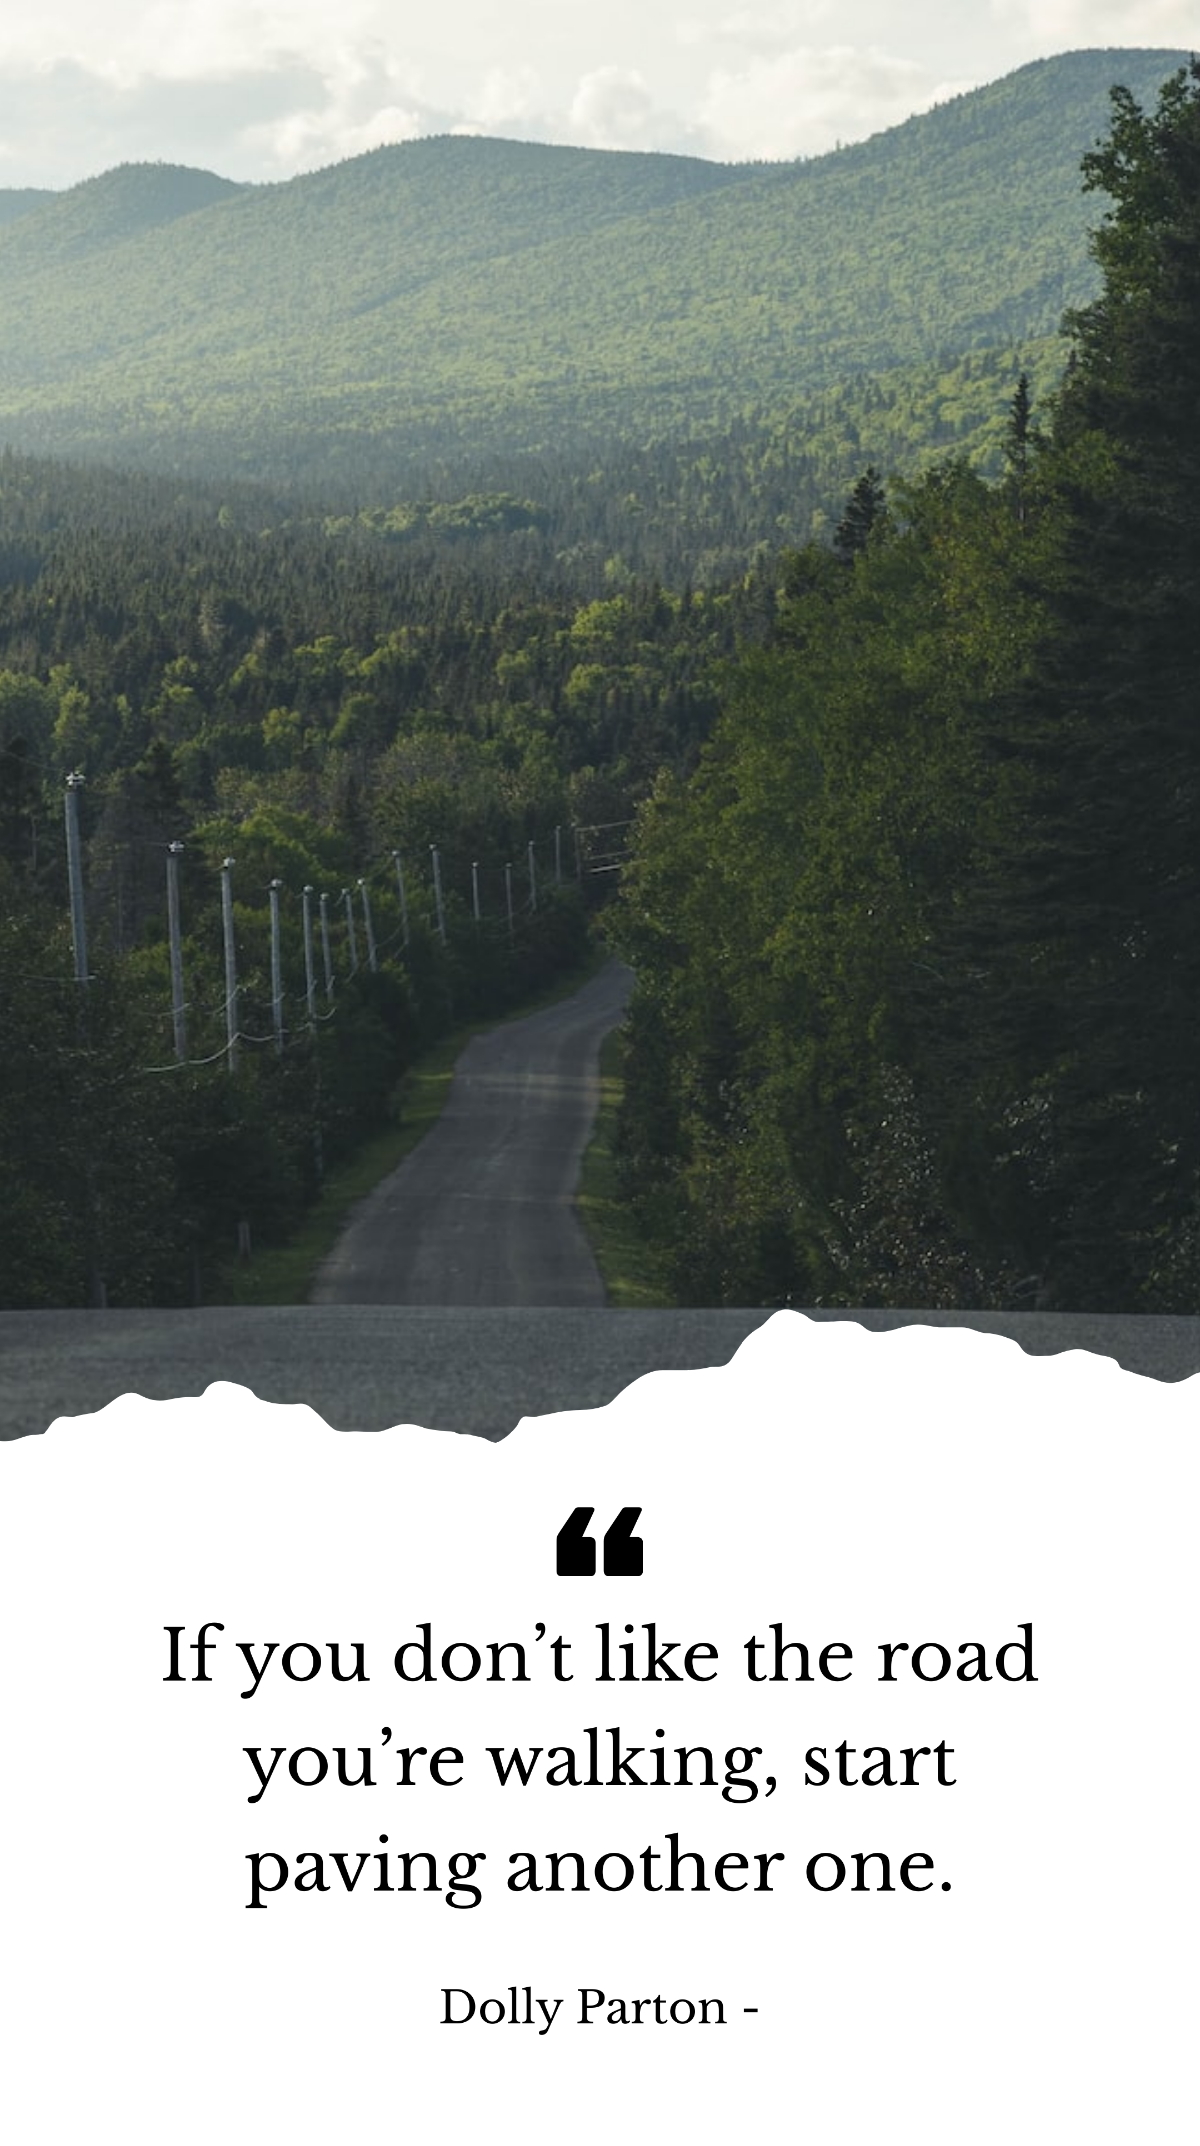 Dolly Parton - If you don’t like the road you’re walking, start paving another one. Template